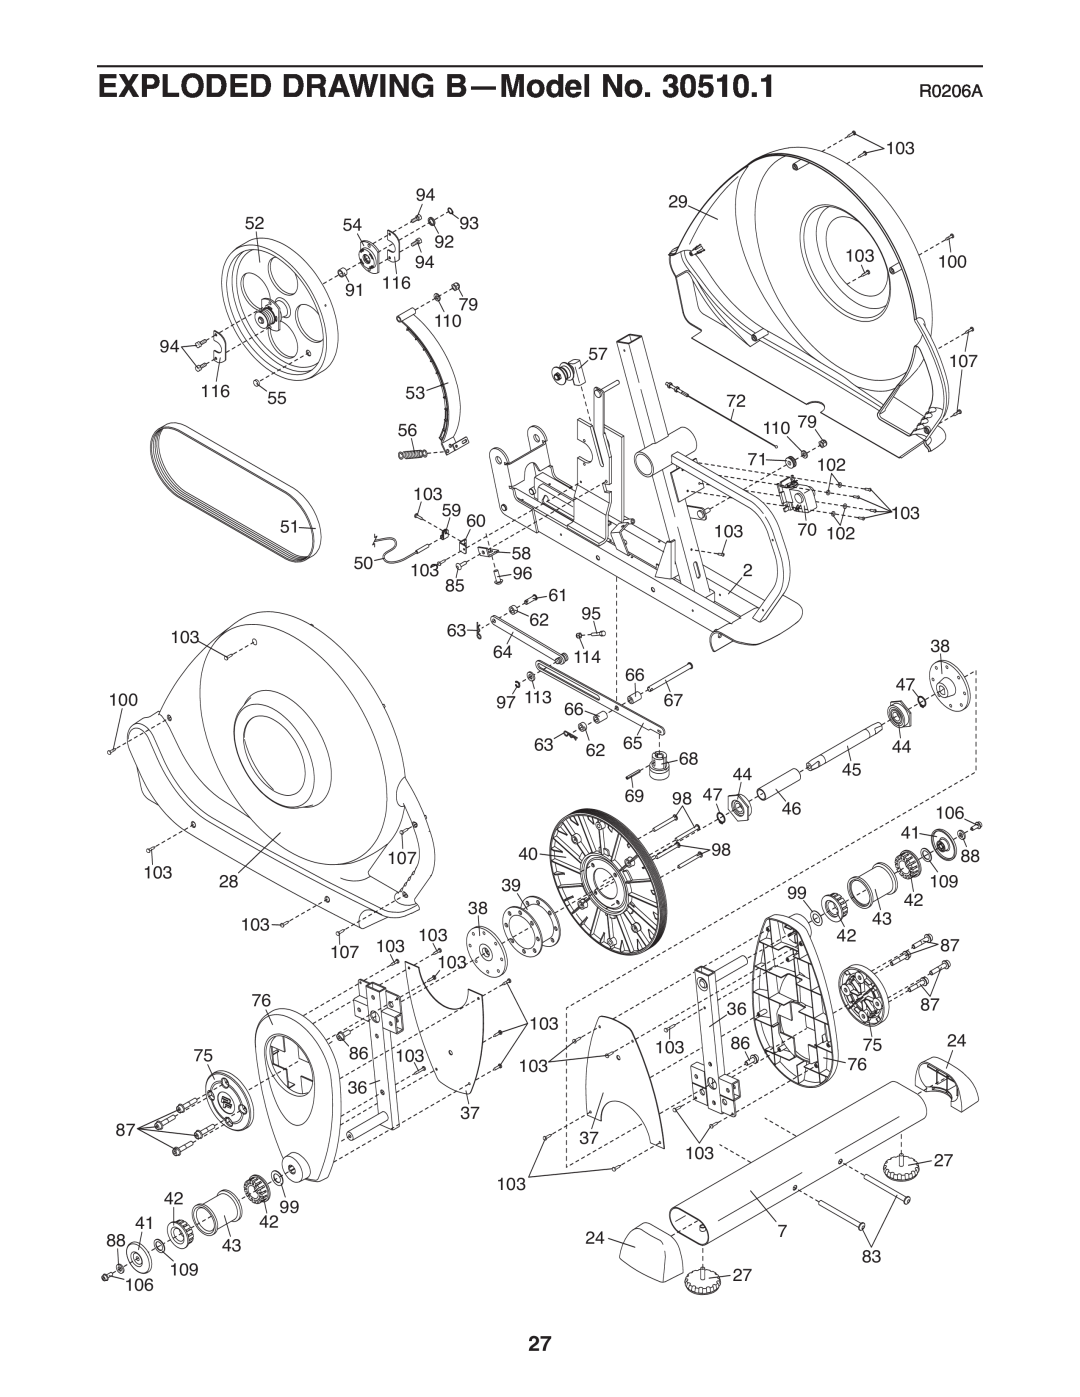 NordicTrack 30510.1 user manual EXPLODED DRAWING B-Model No 